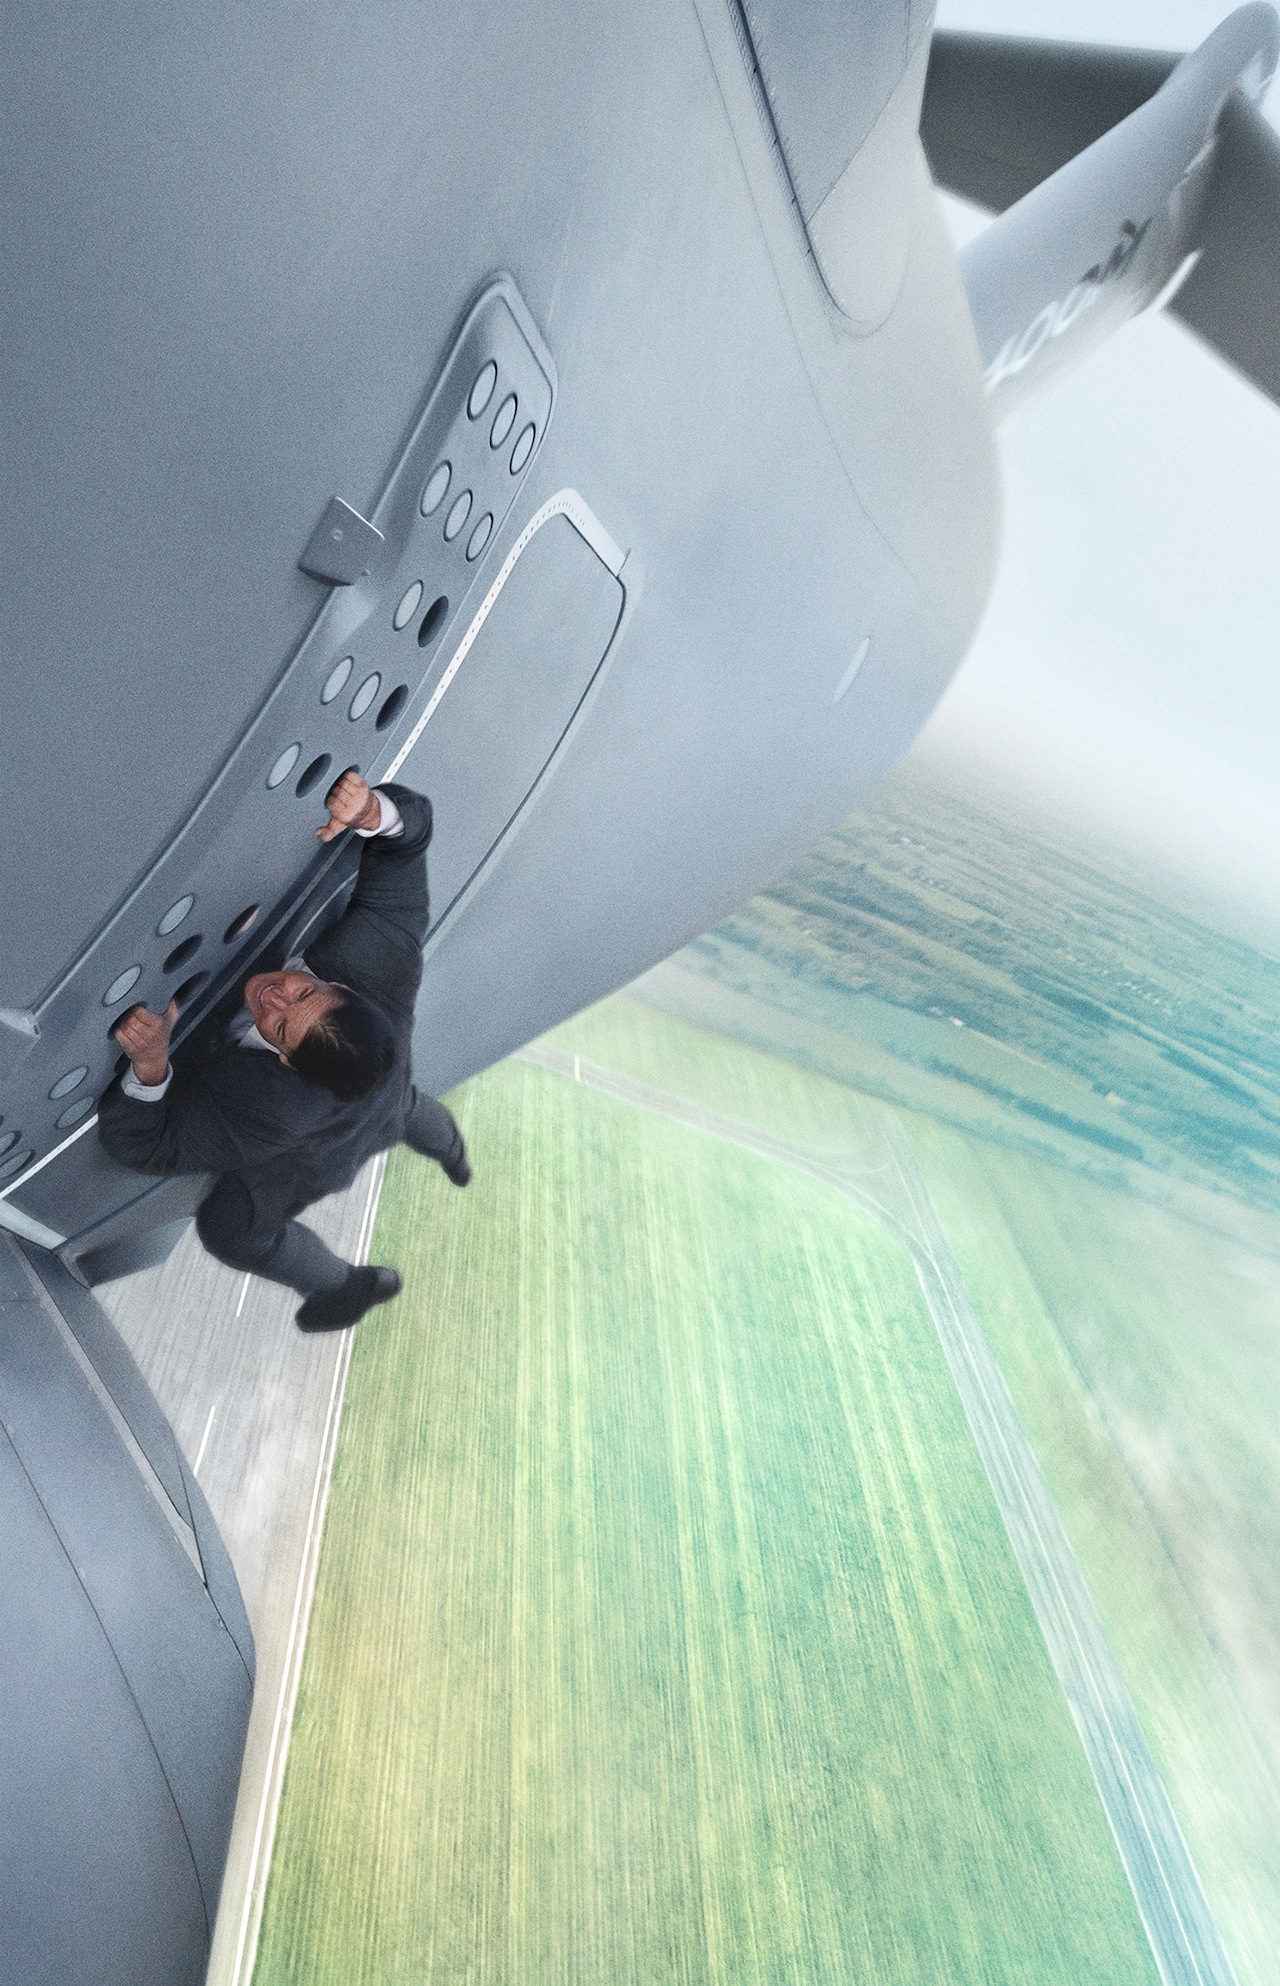 MISSION: IMPOSSIBLE - ROGUE NATION